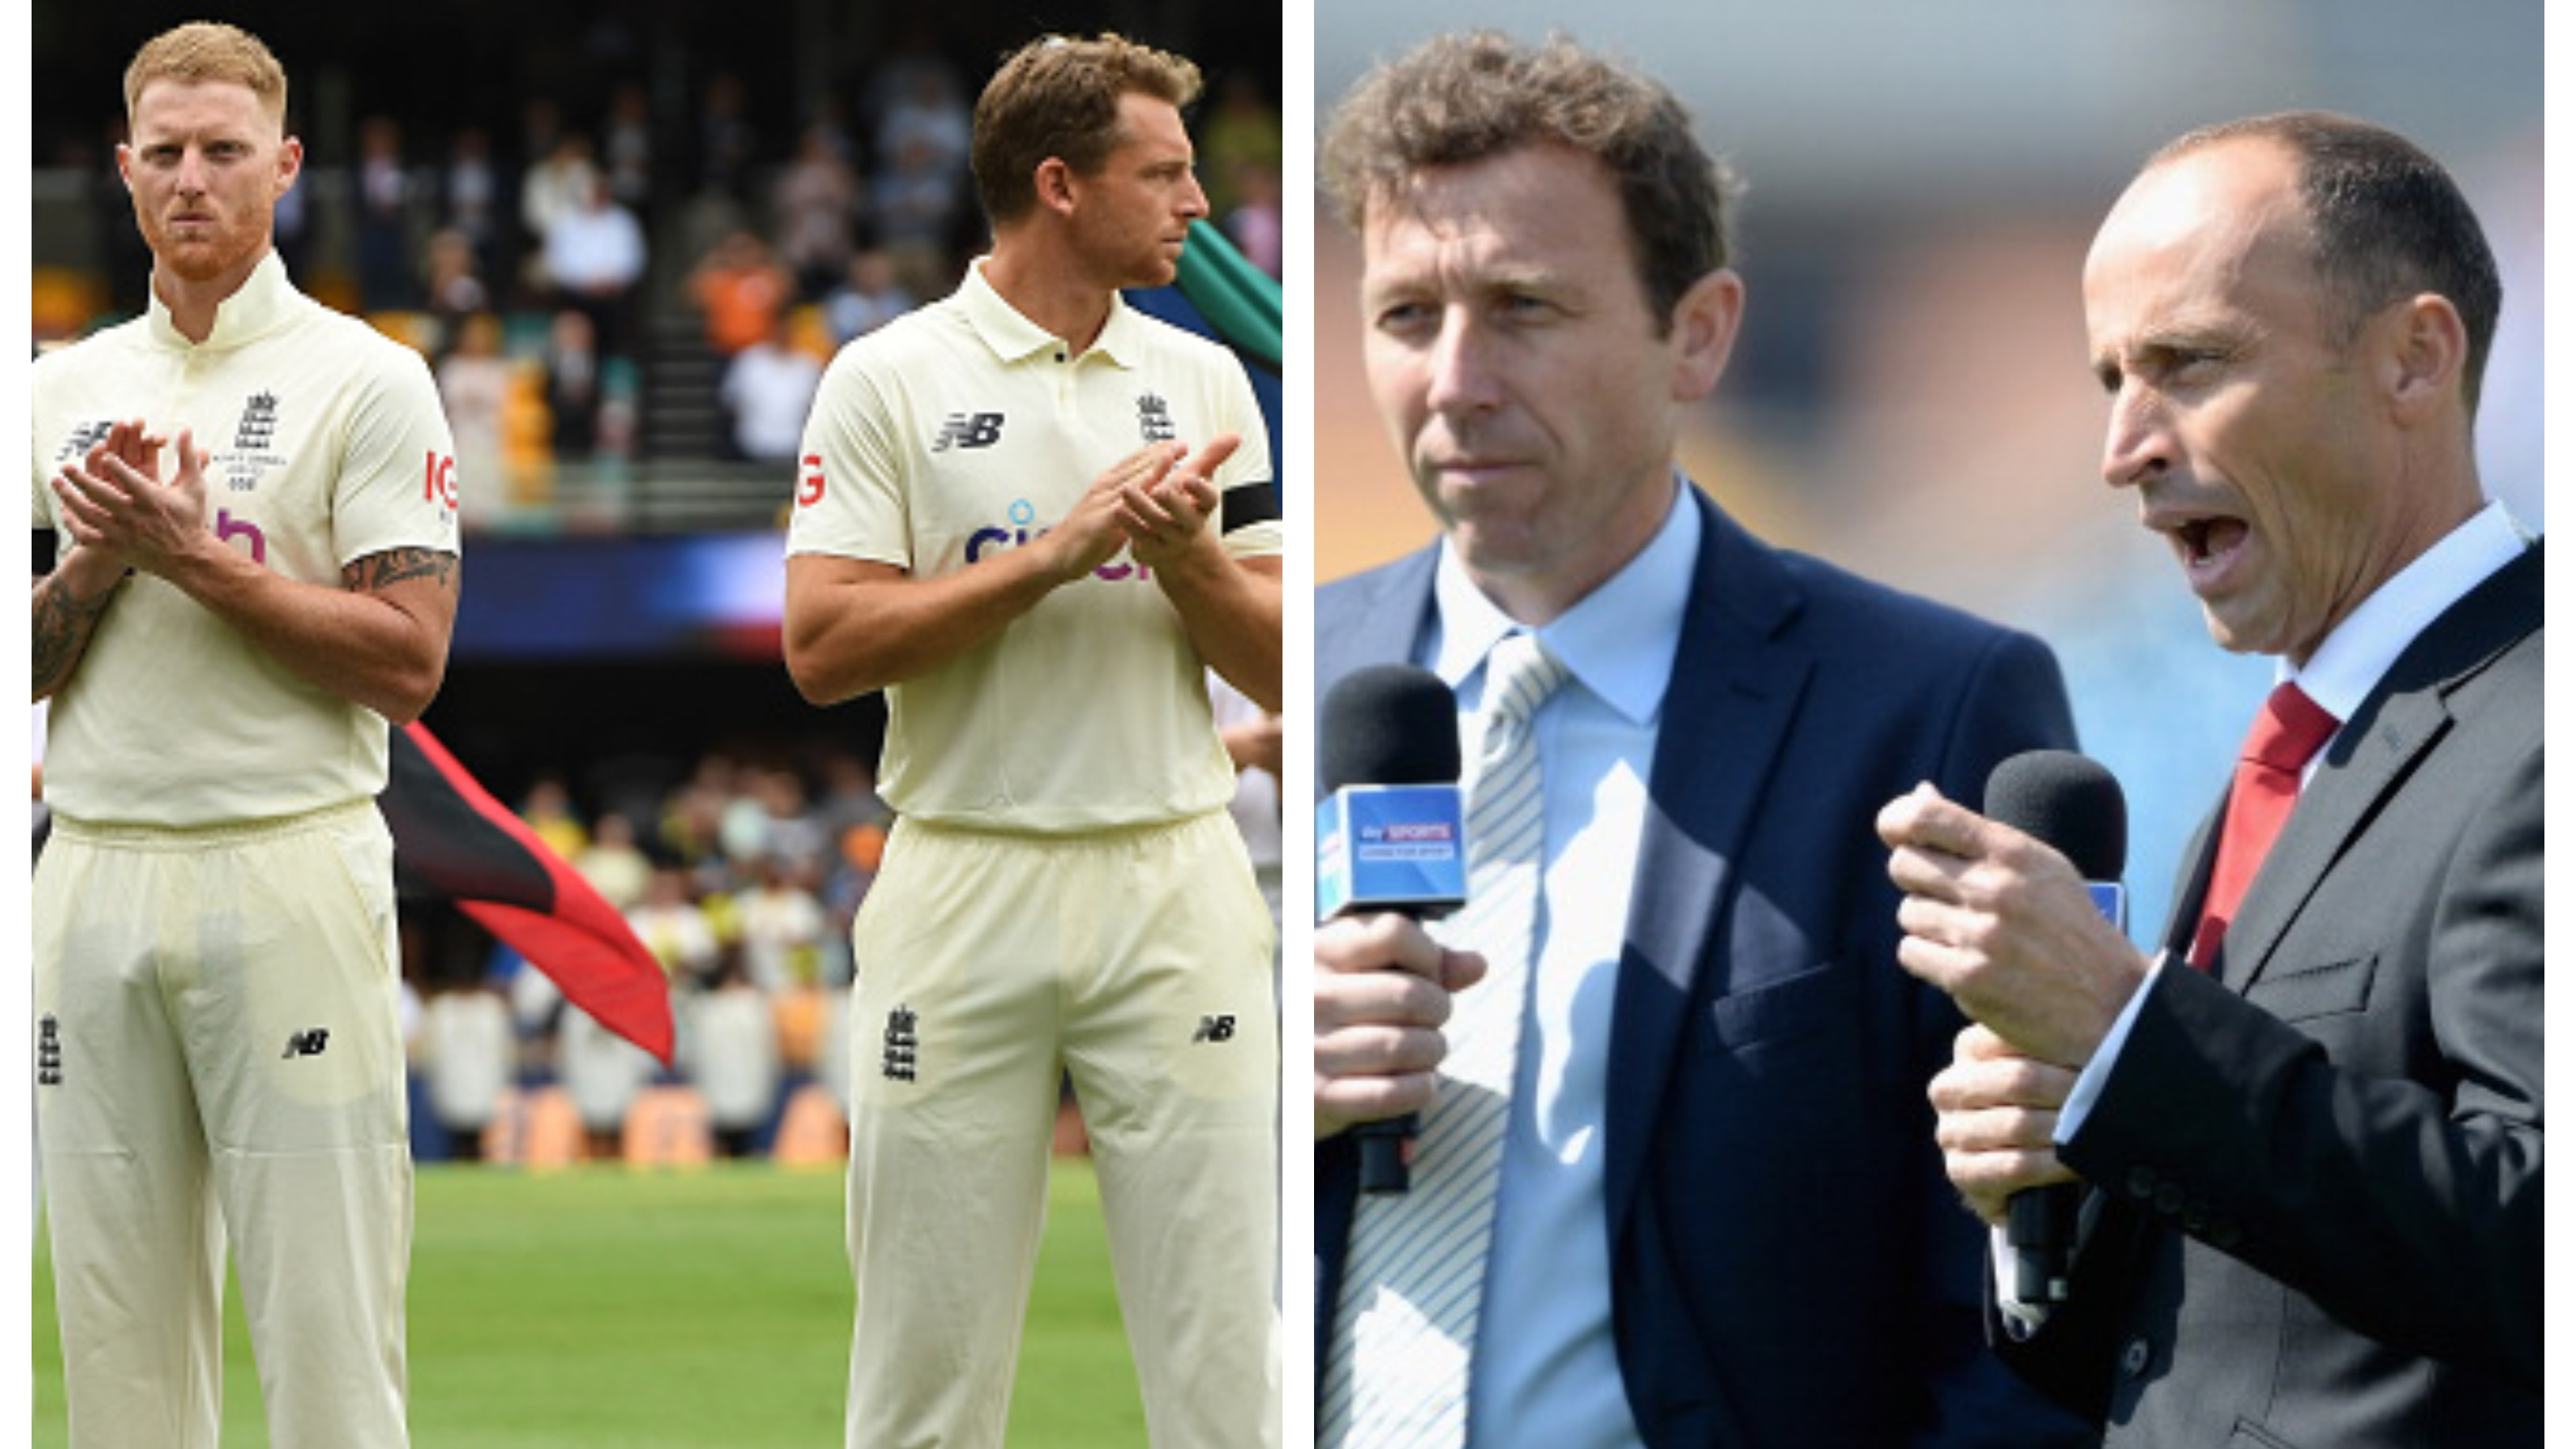 Ashes 2021-22: “It can't just be Root”, former England captains ask other batters to lift their game